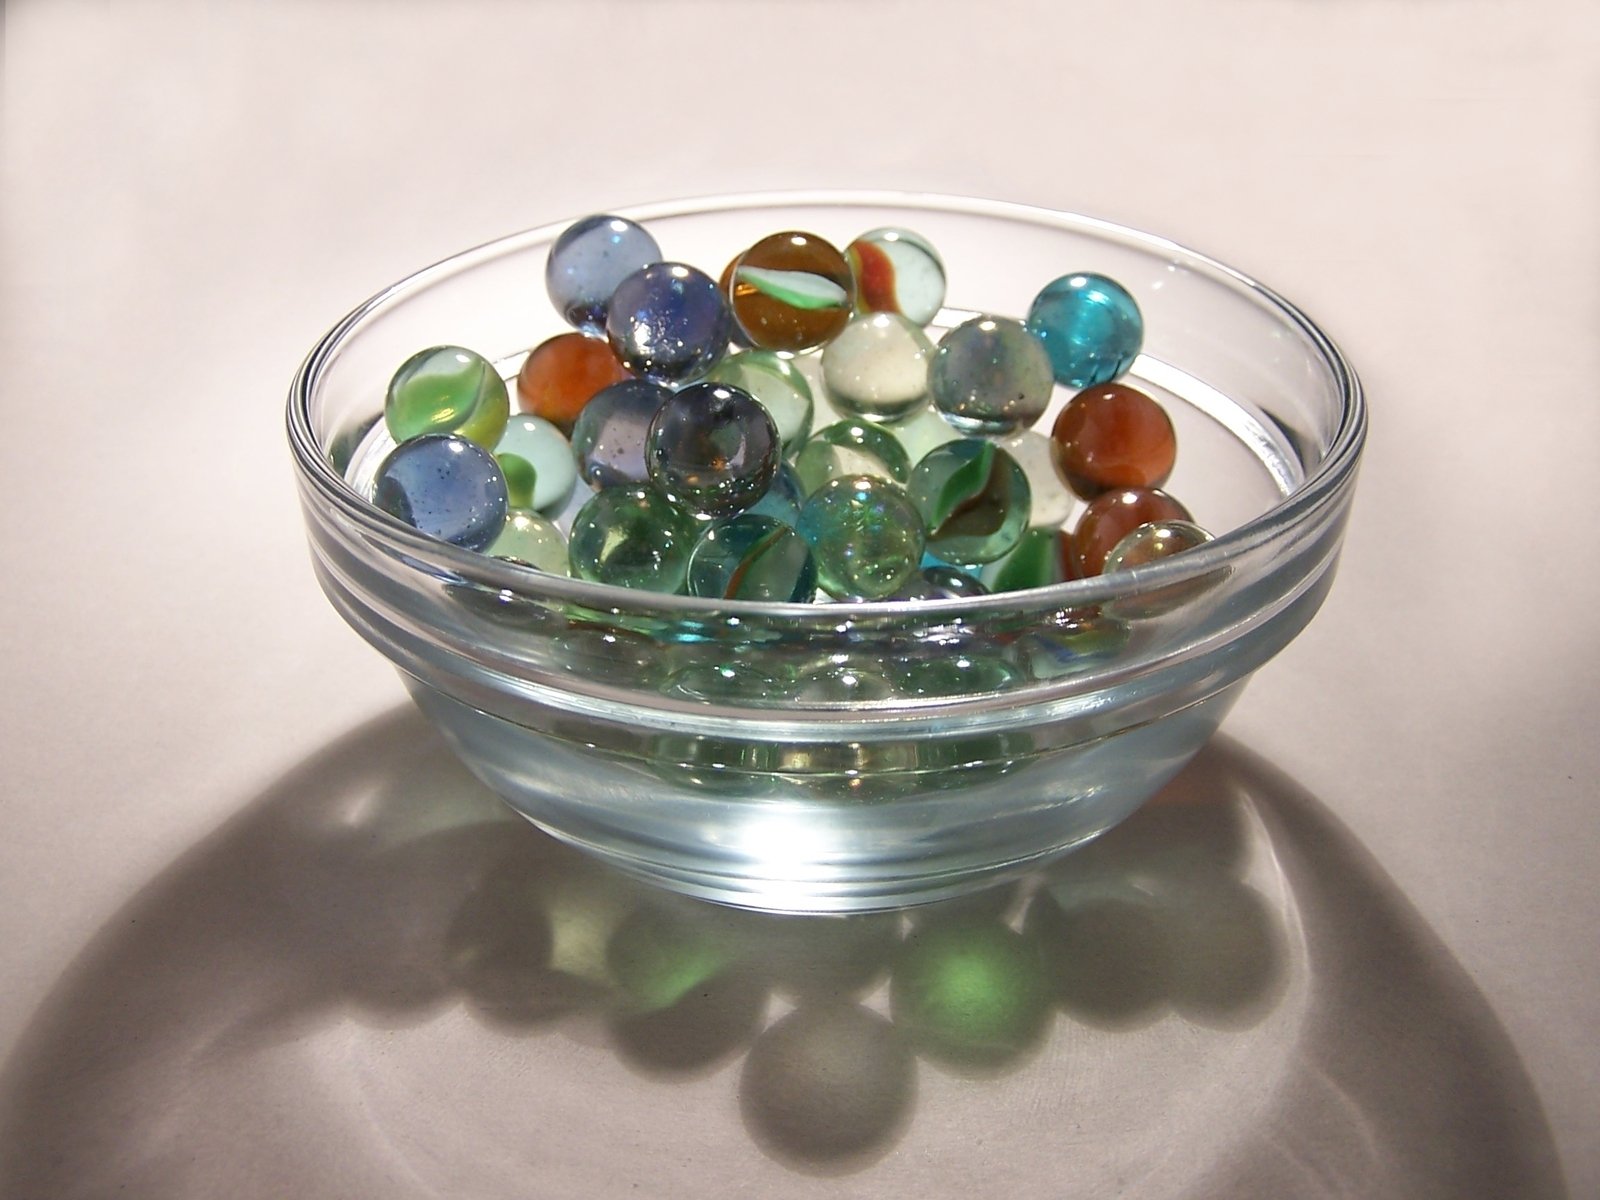 many marbles in a bowl on a shiny surface